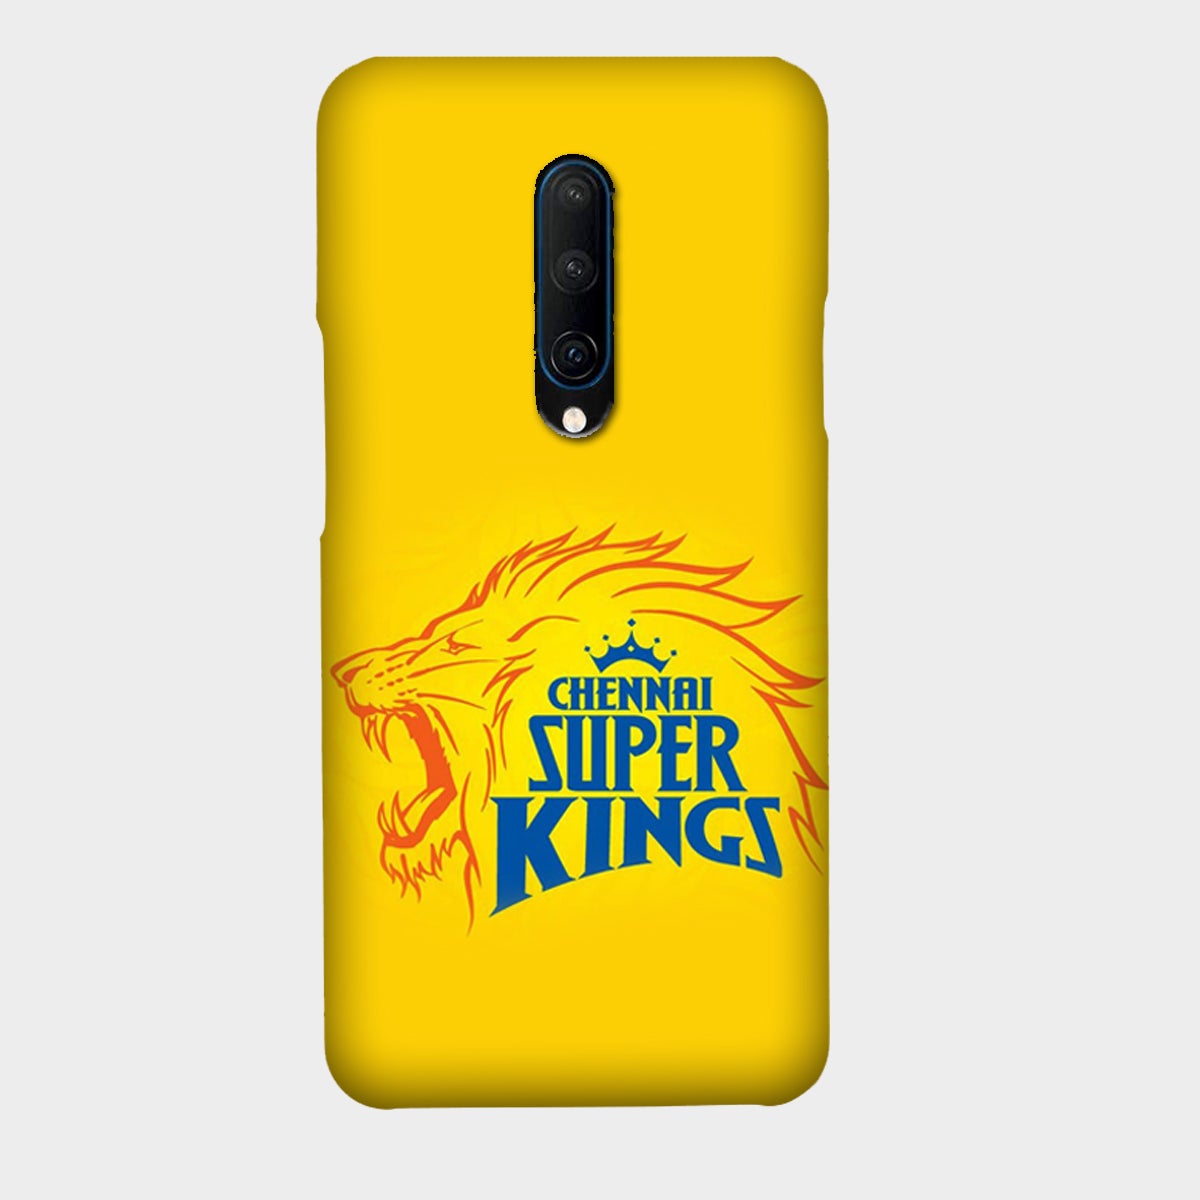 Chennai Super Kings - Yellow - Mobile Phone Cover - Hard Case - OnePlus